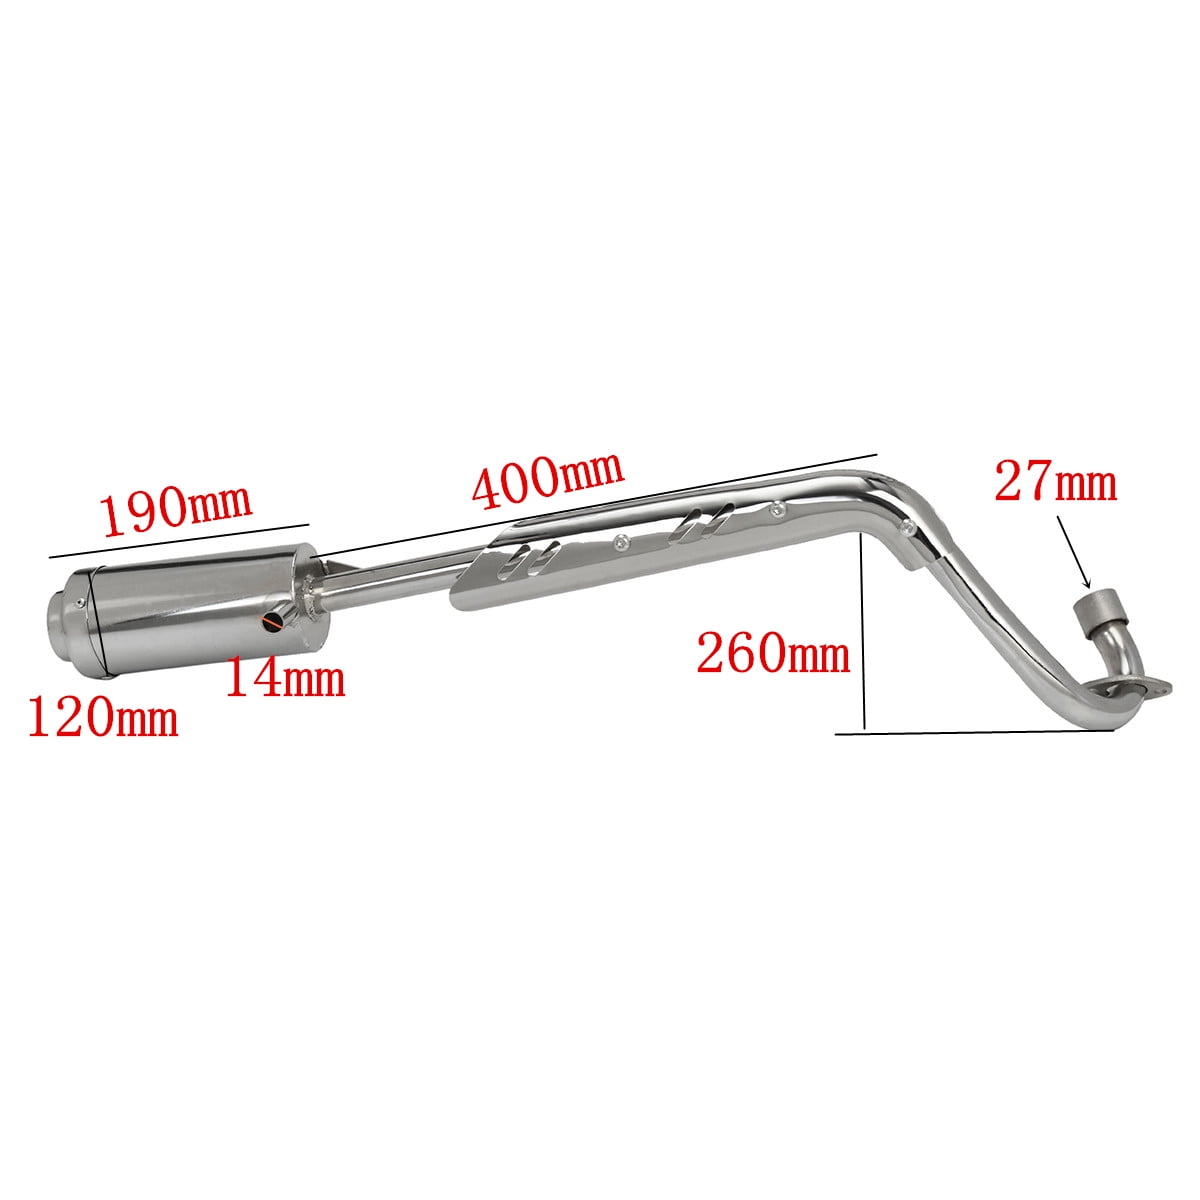 EXHAUST PIPE SYSTEM MUFFLER 4 STROKE FOR CRF50 DIRT PIT BIKE 50cc 110cc  125cc